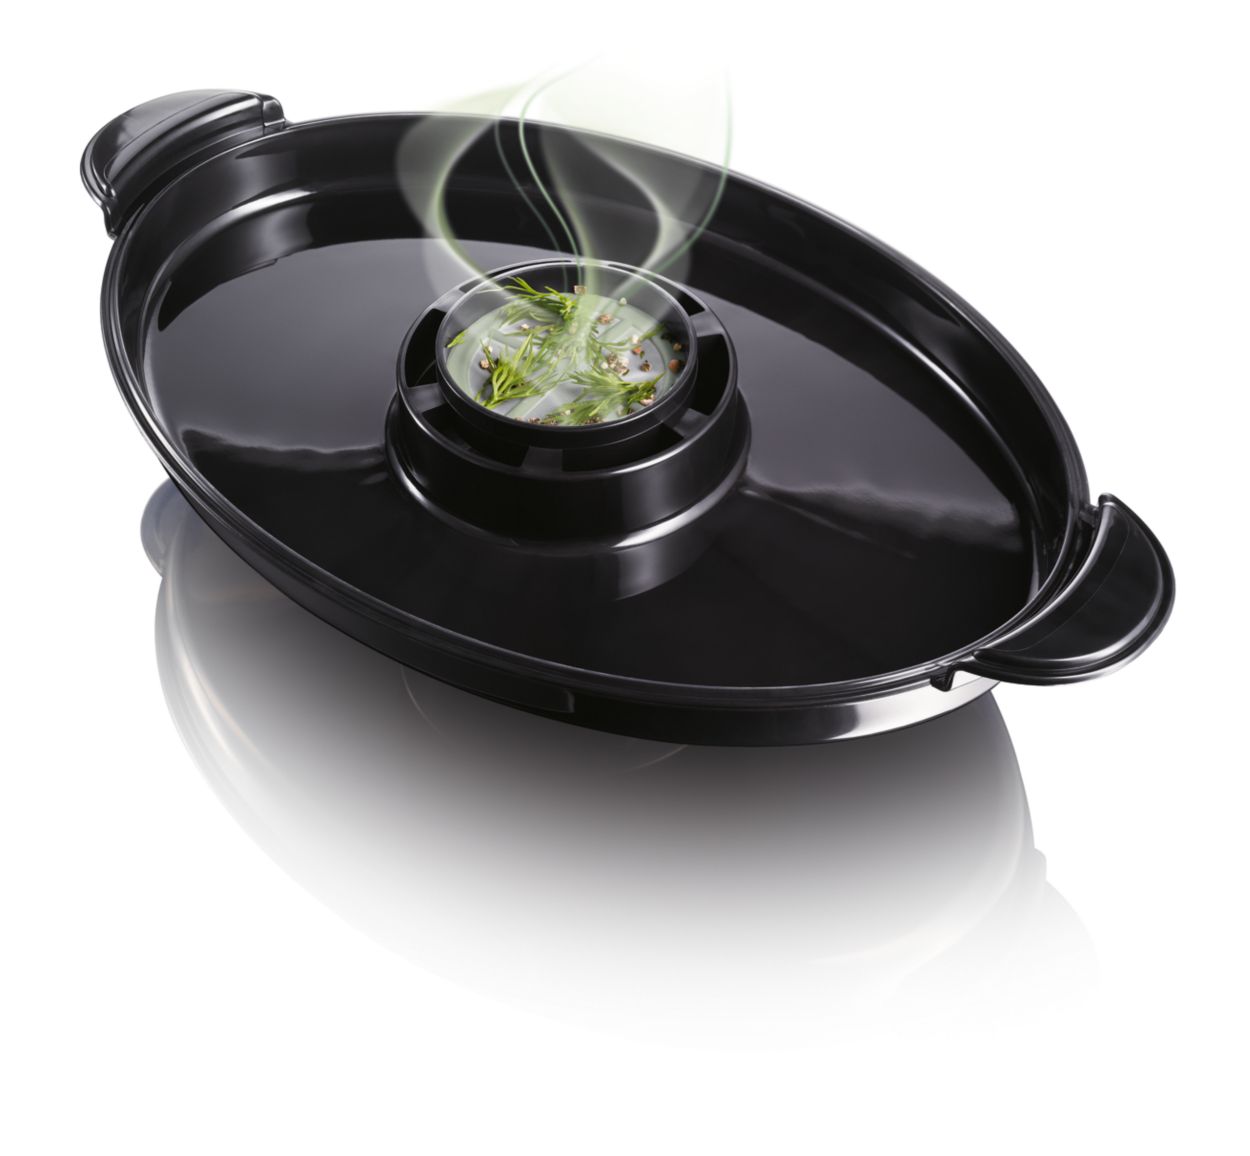 Philips HD9140 Food Steamer - Ansons